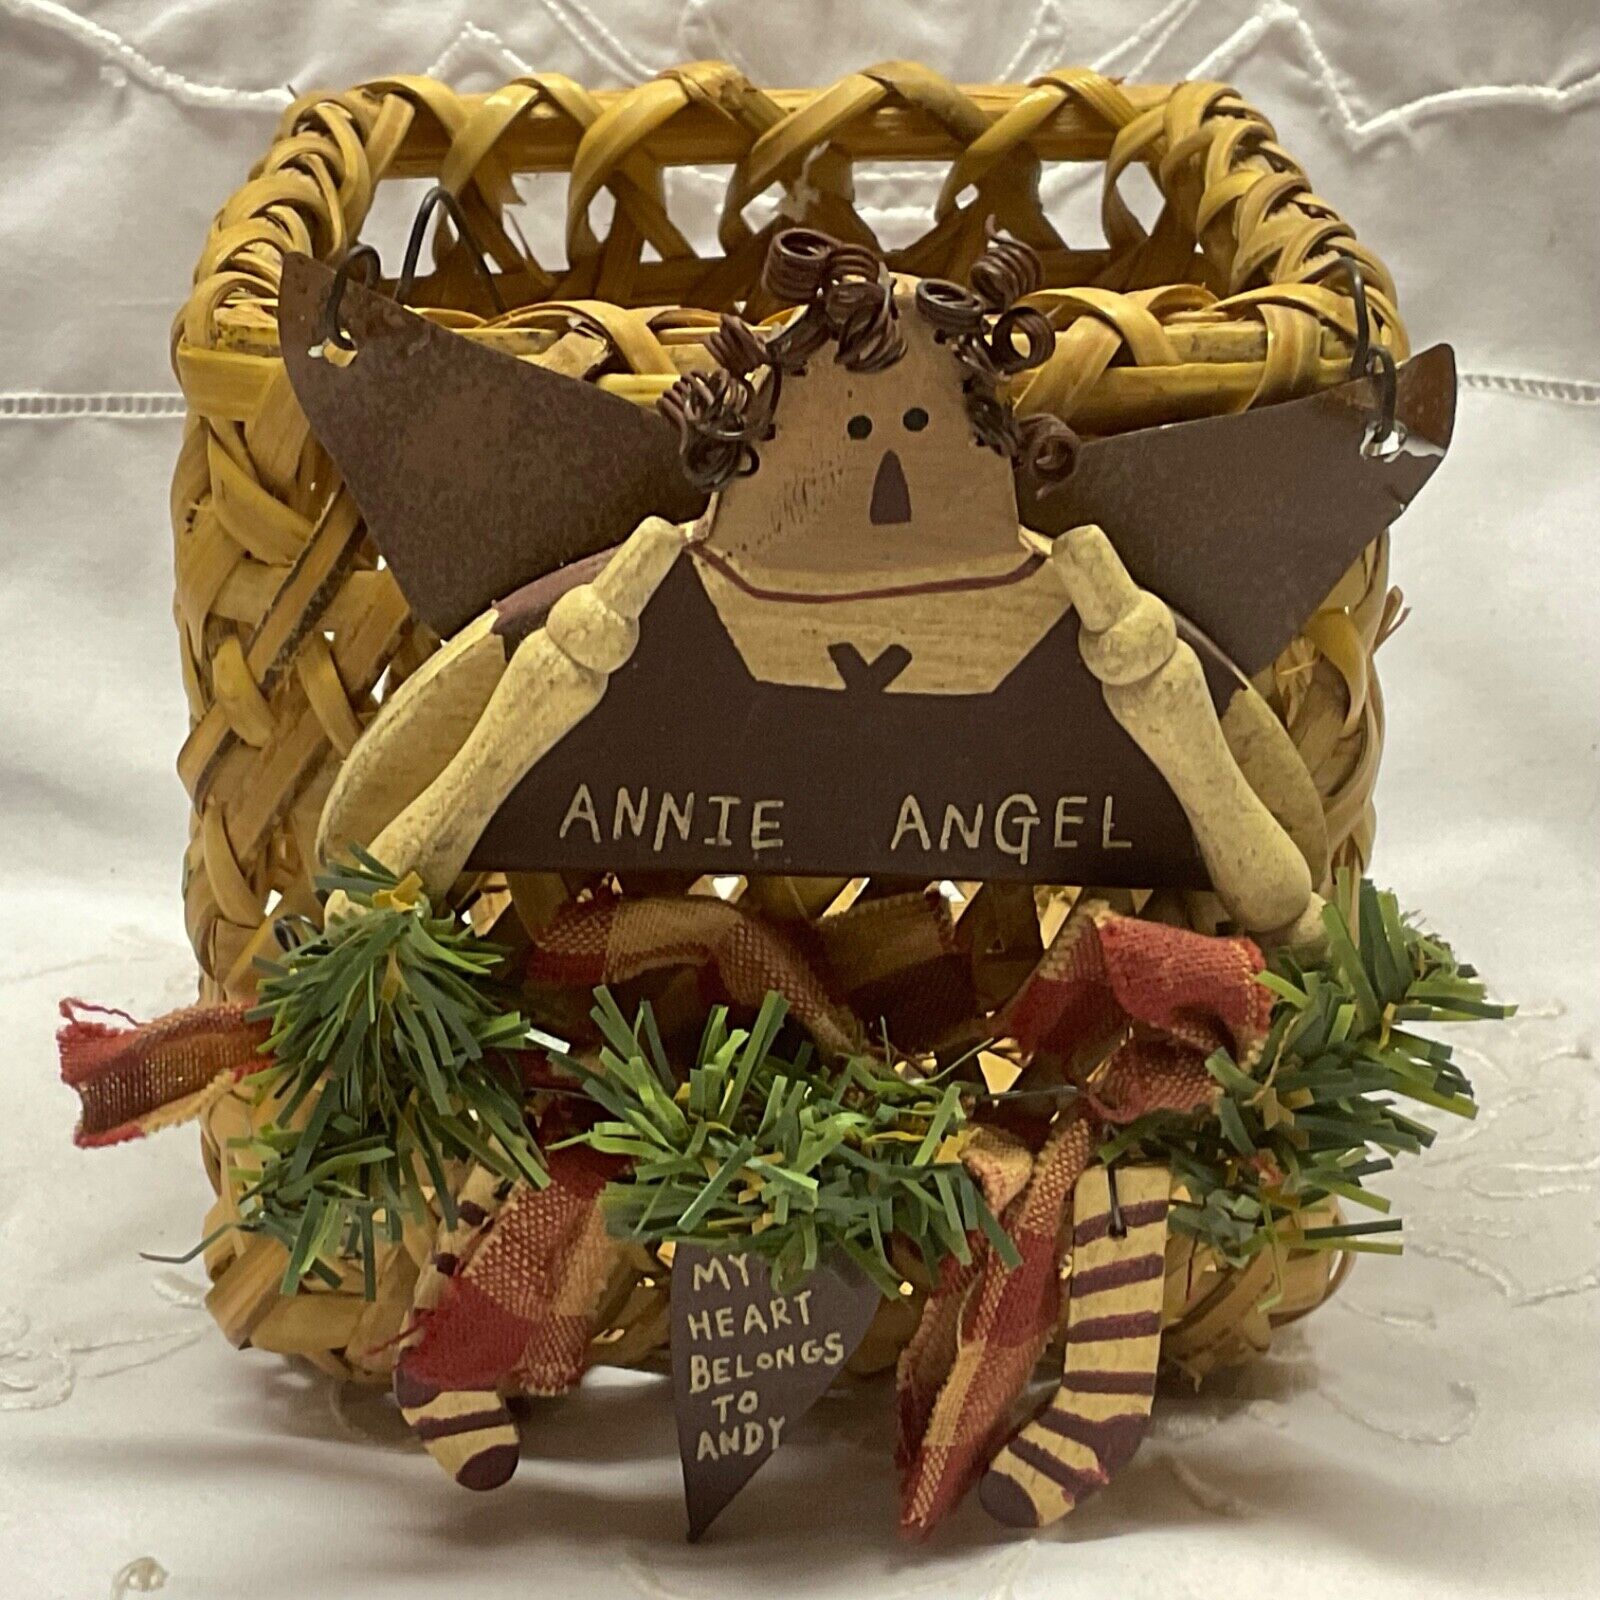 PRIMITIVE ANNIE ANGEL SMALL BASKET “MY HEART BELONGS TO ANDY” 4x4x4 in.